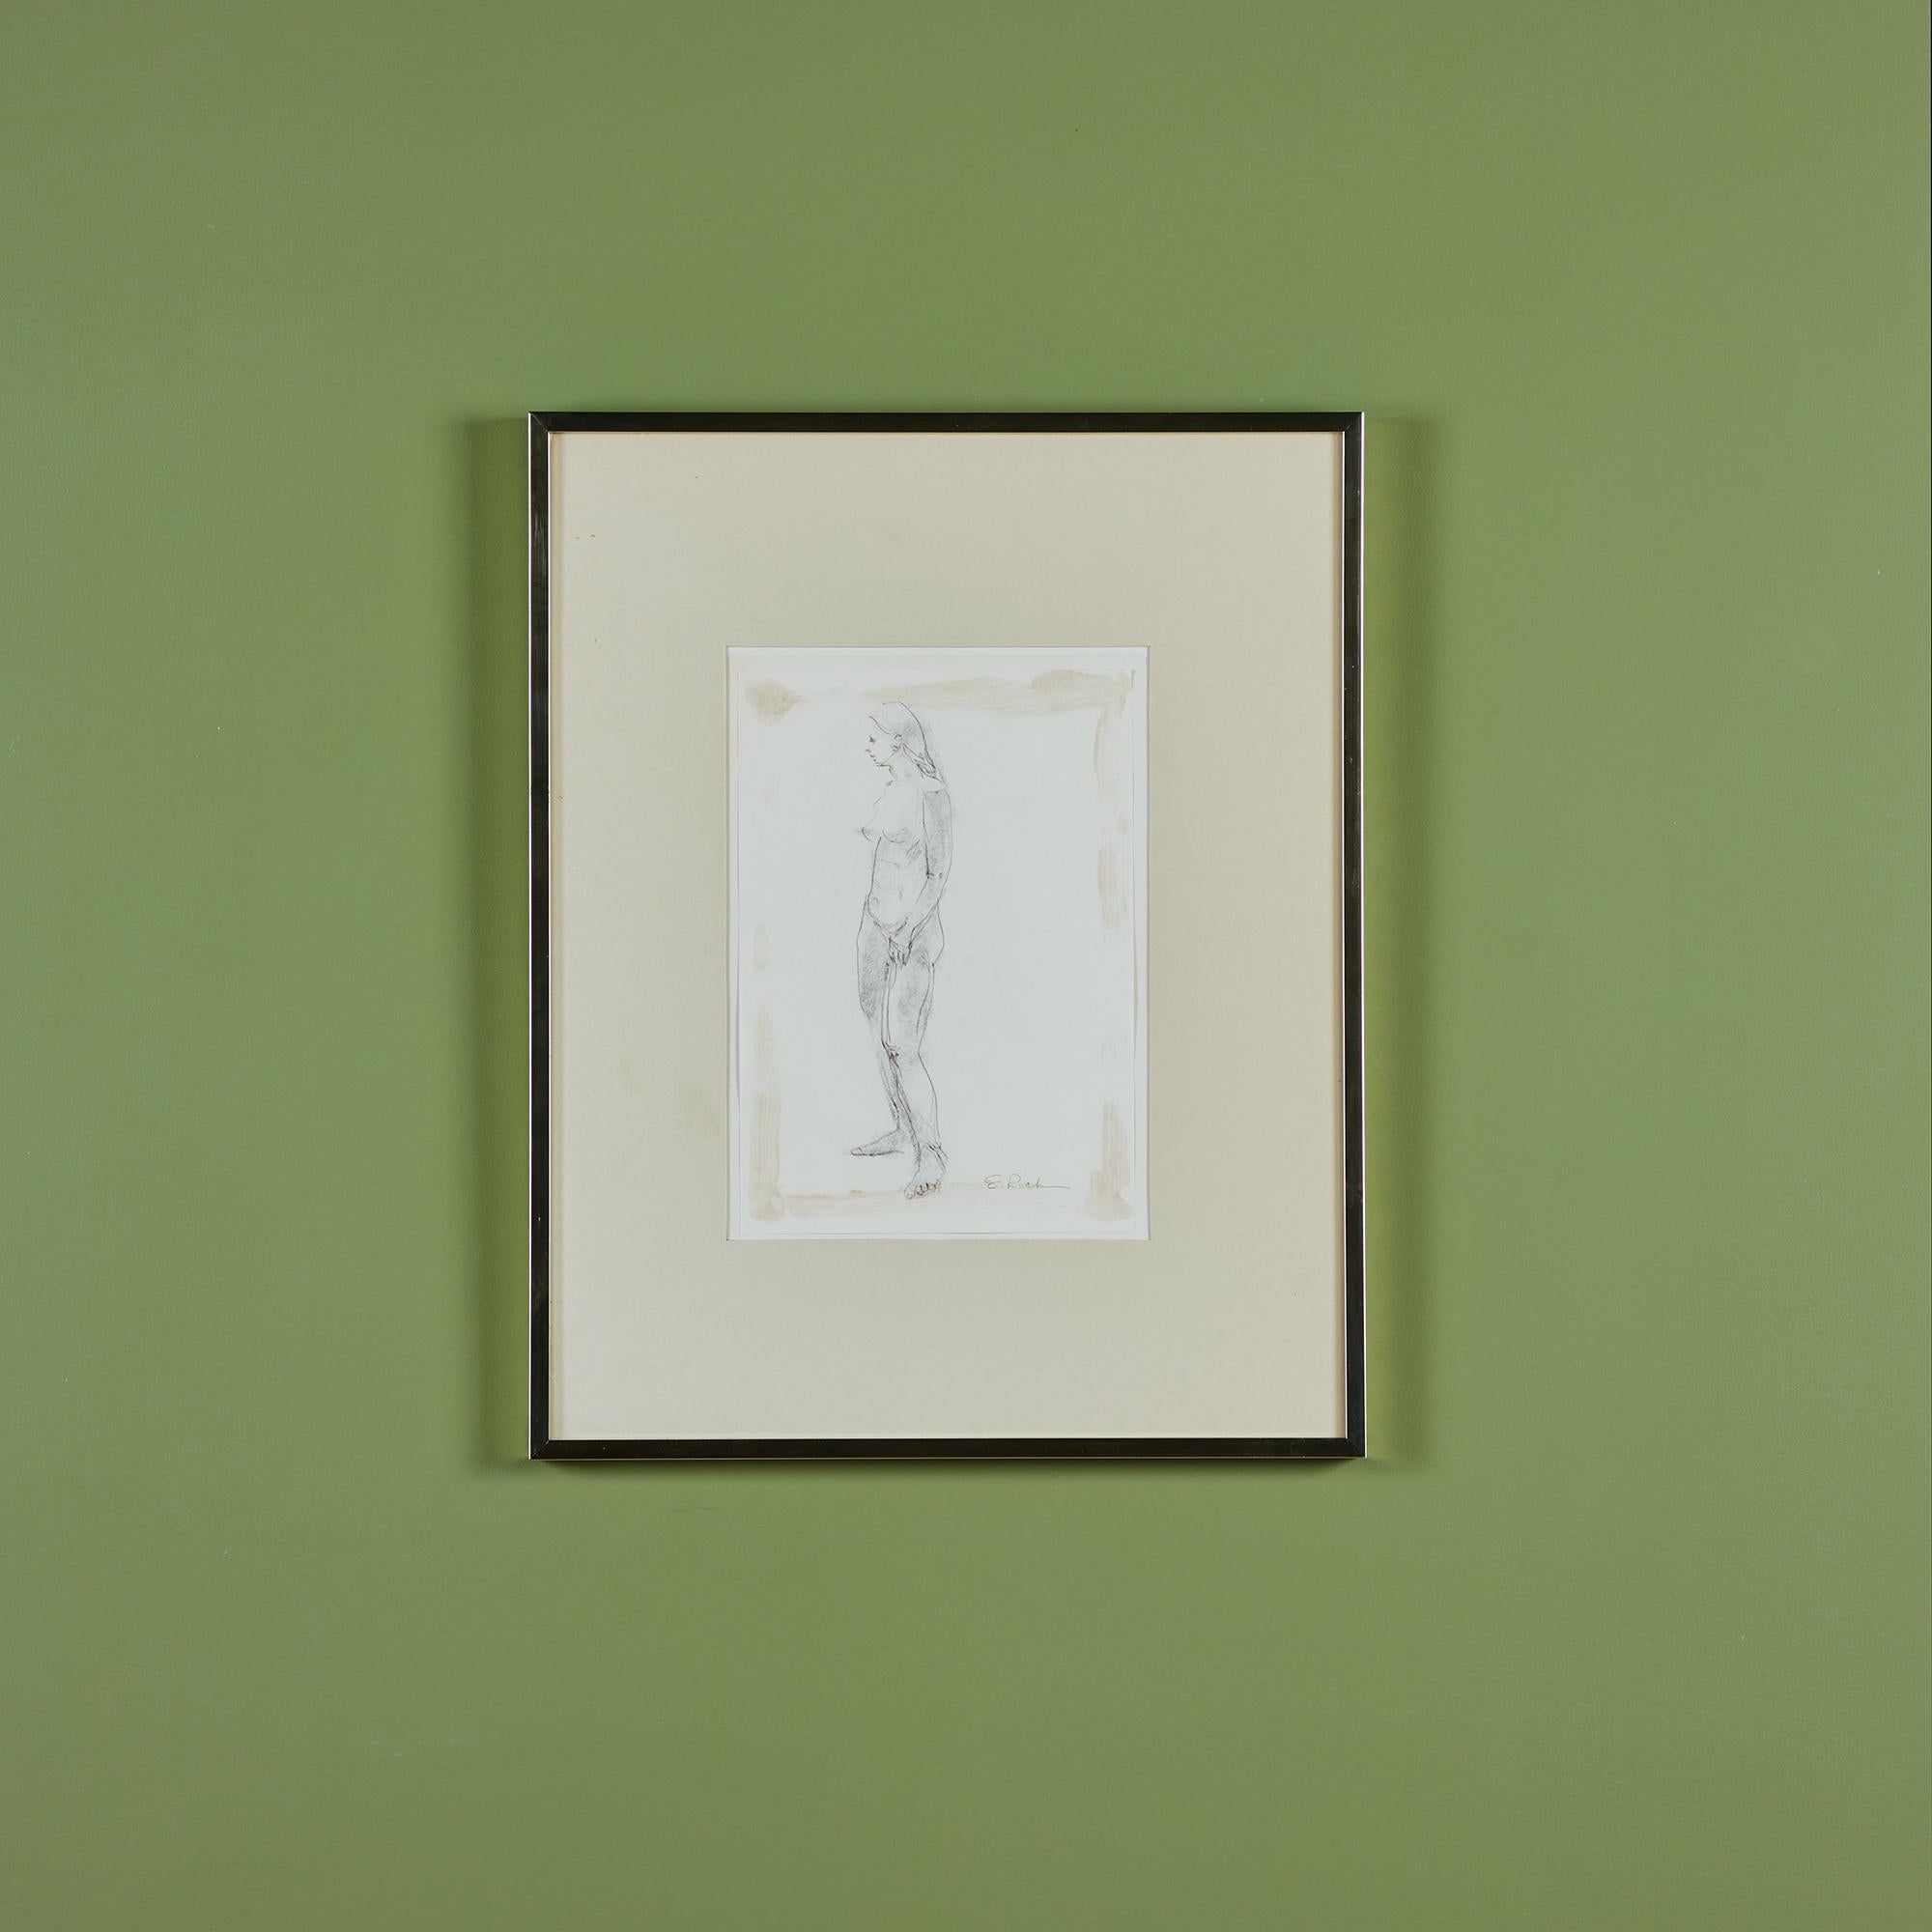 Brass framed nude figure pencil sketch signed by the artist E. Rich.

Dimensions
16.5” width x 20.5” height.

Condition
Good vintage condition; professionally cleaned.